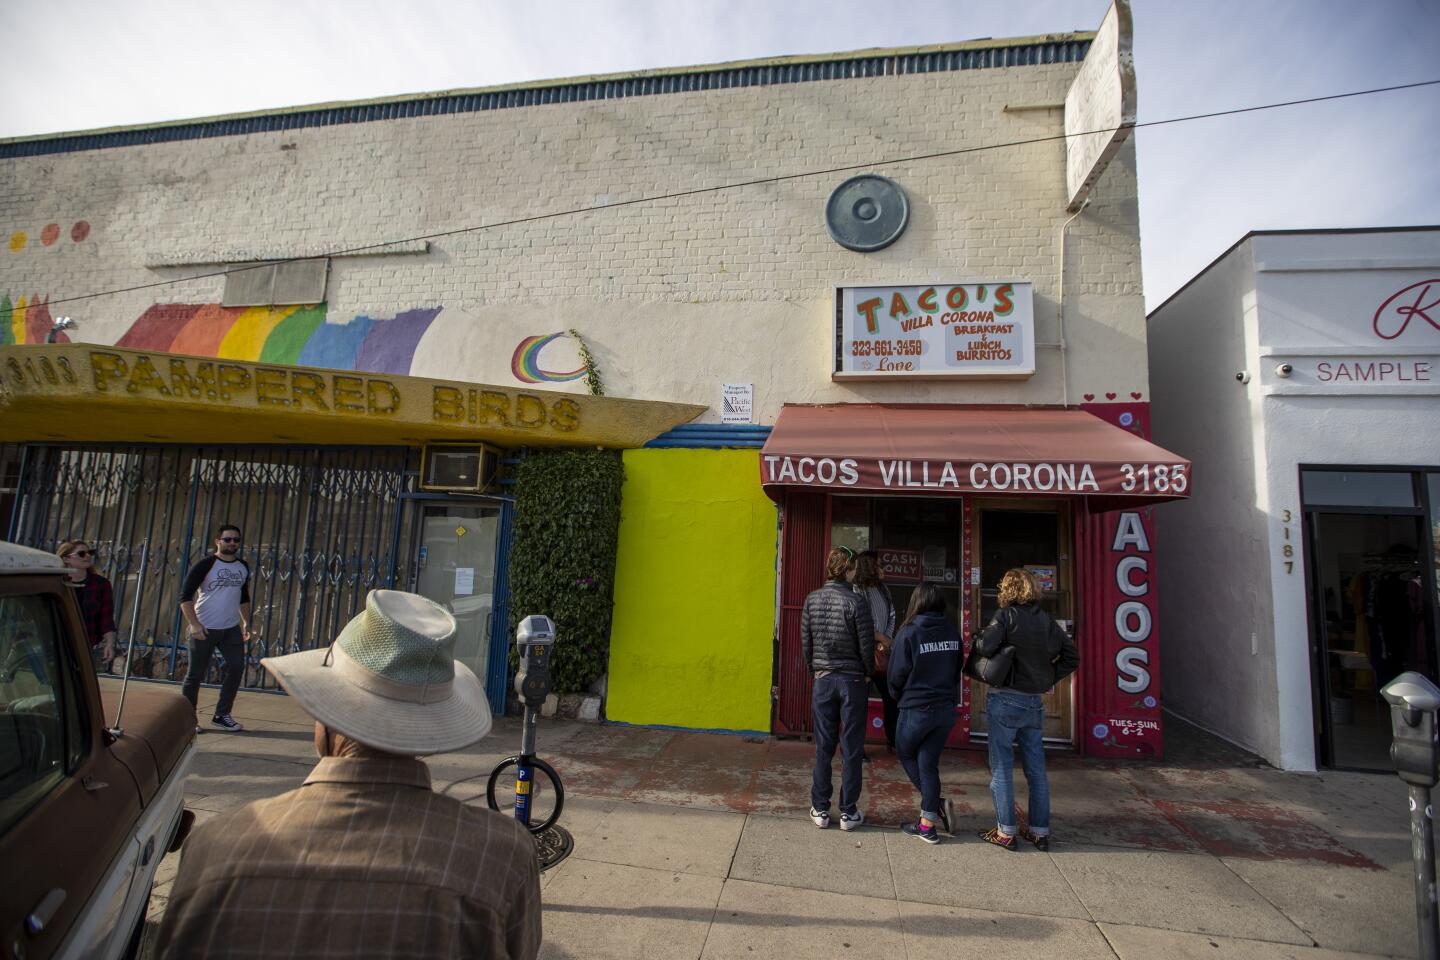 Patrons wait in line at Tacos Villa Corona, where Anthony Bourdain once stopped in Atwater Village.